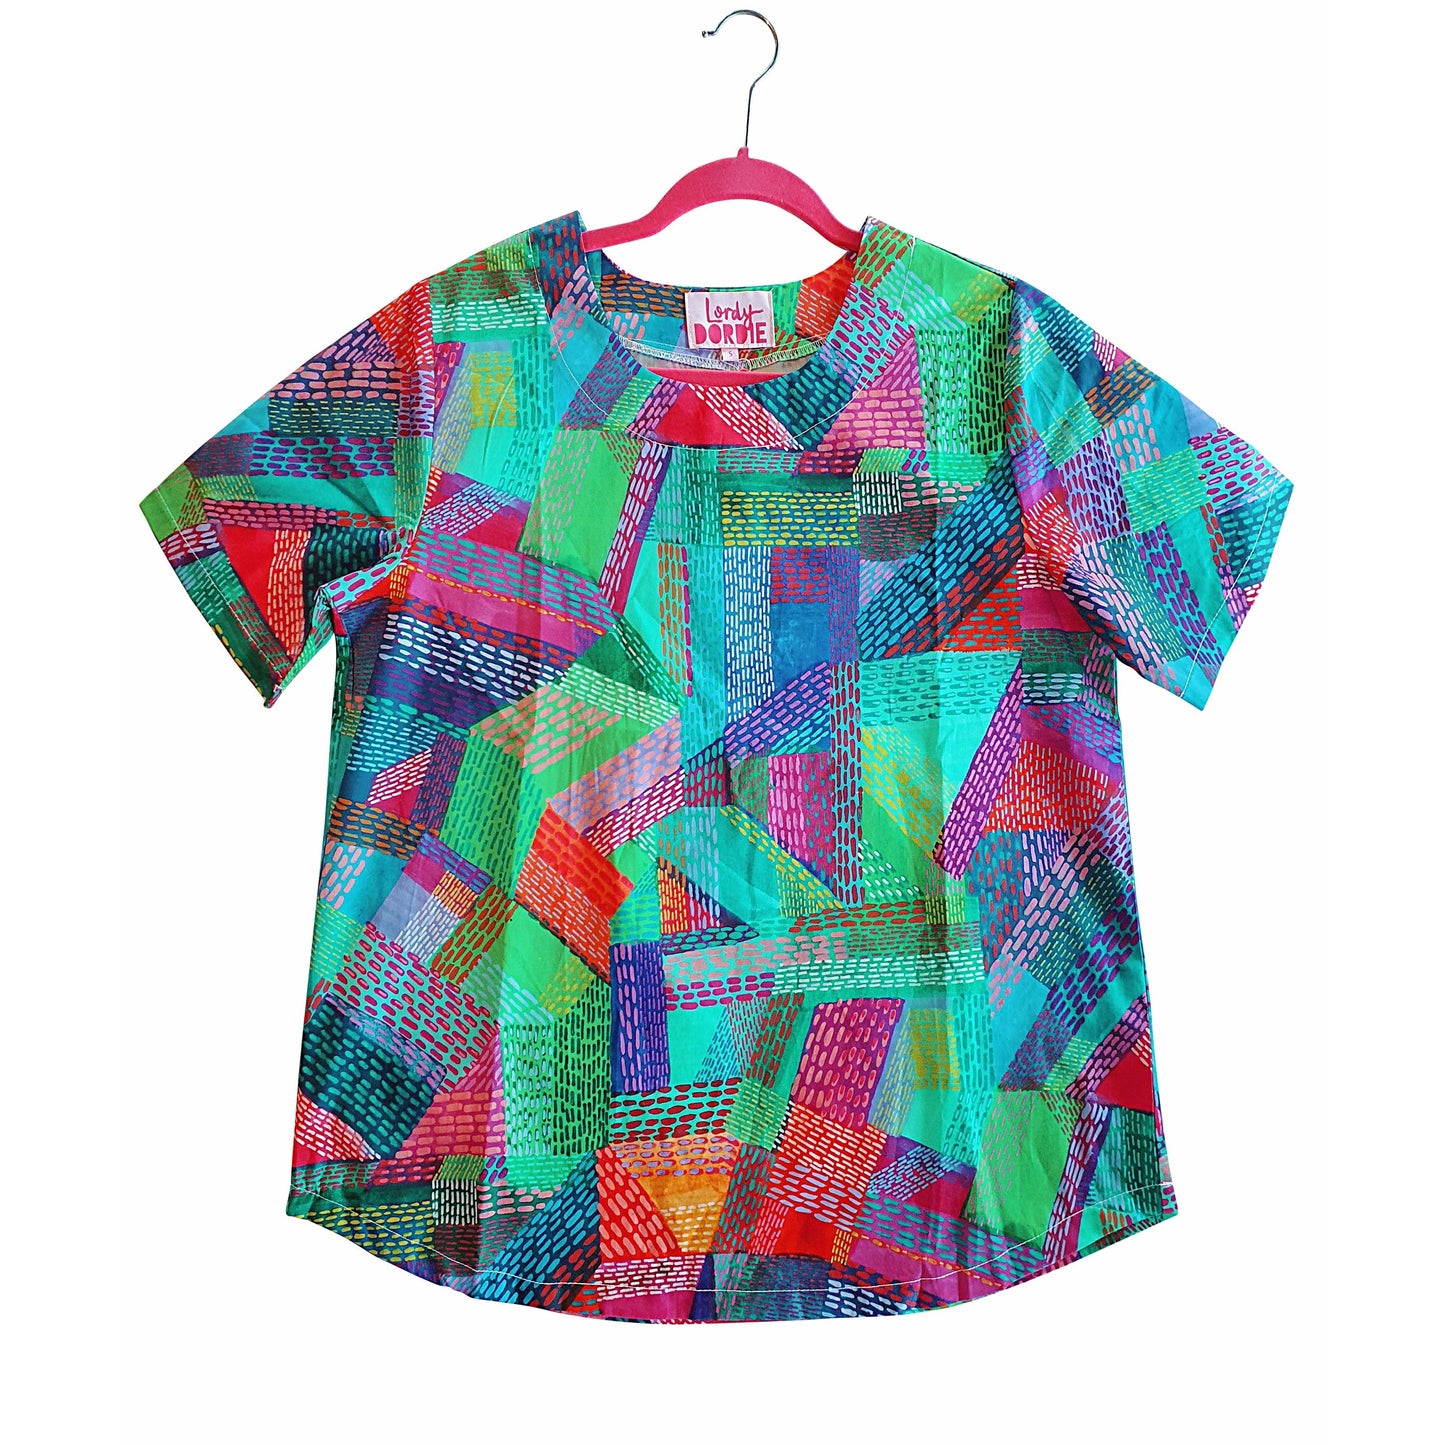 Collage - MEG TUNIC TOP - Lordy Dordie Art